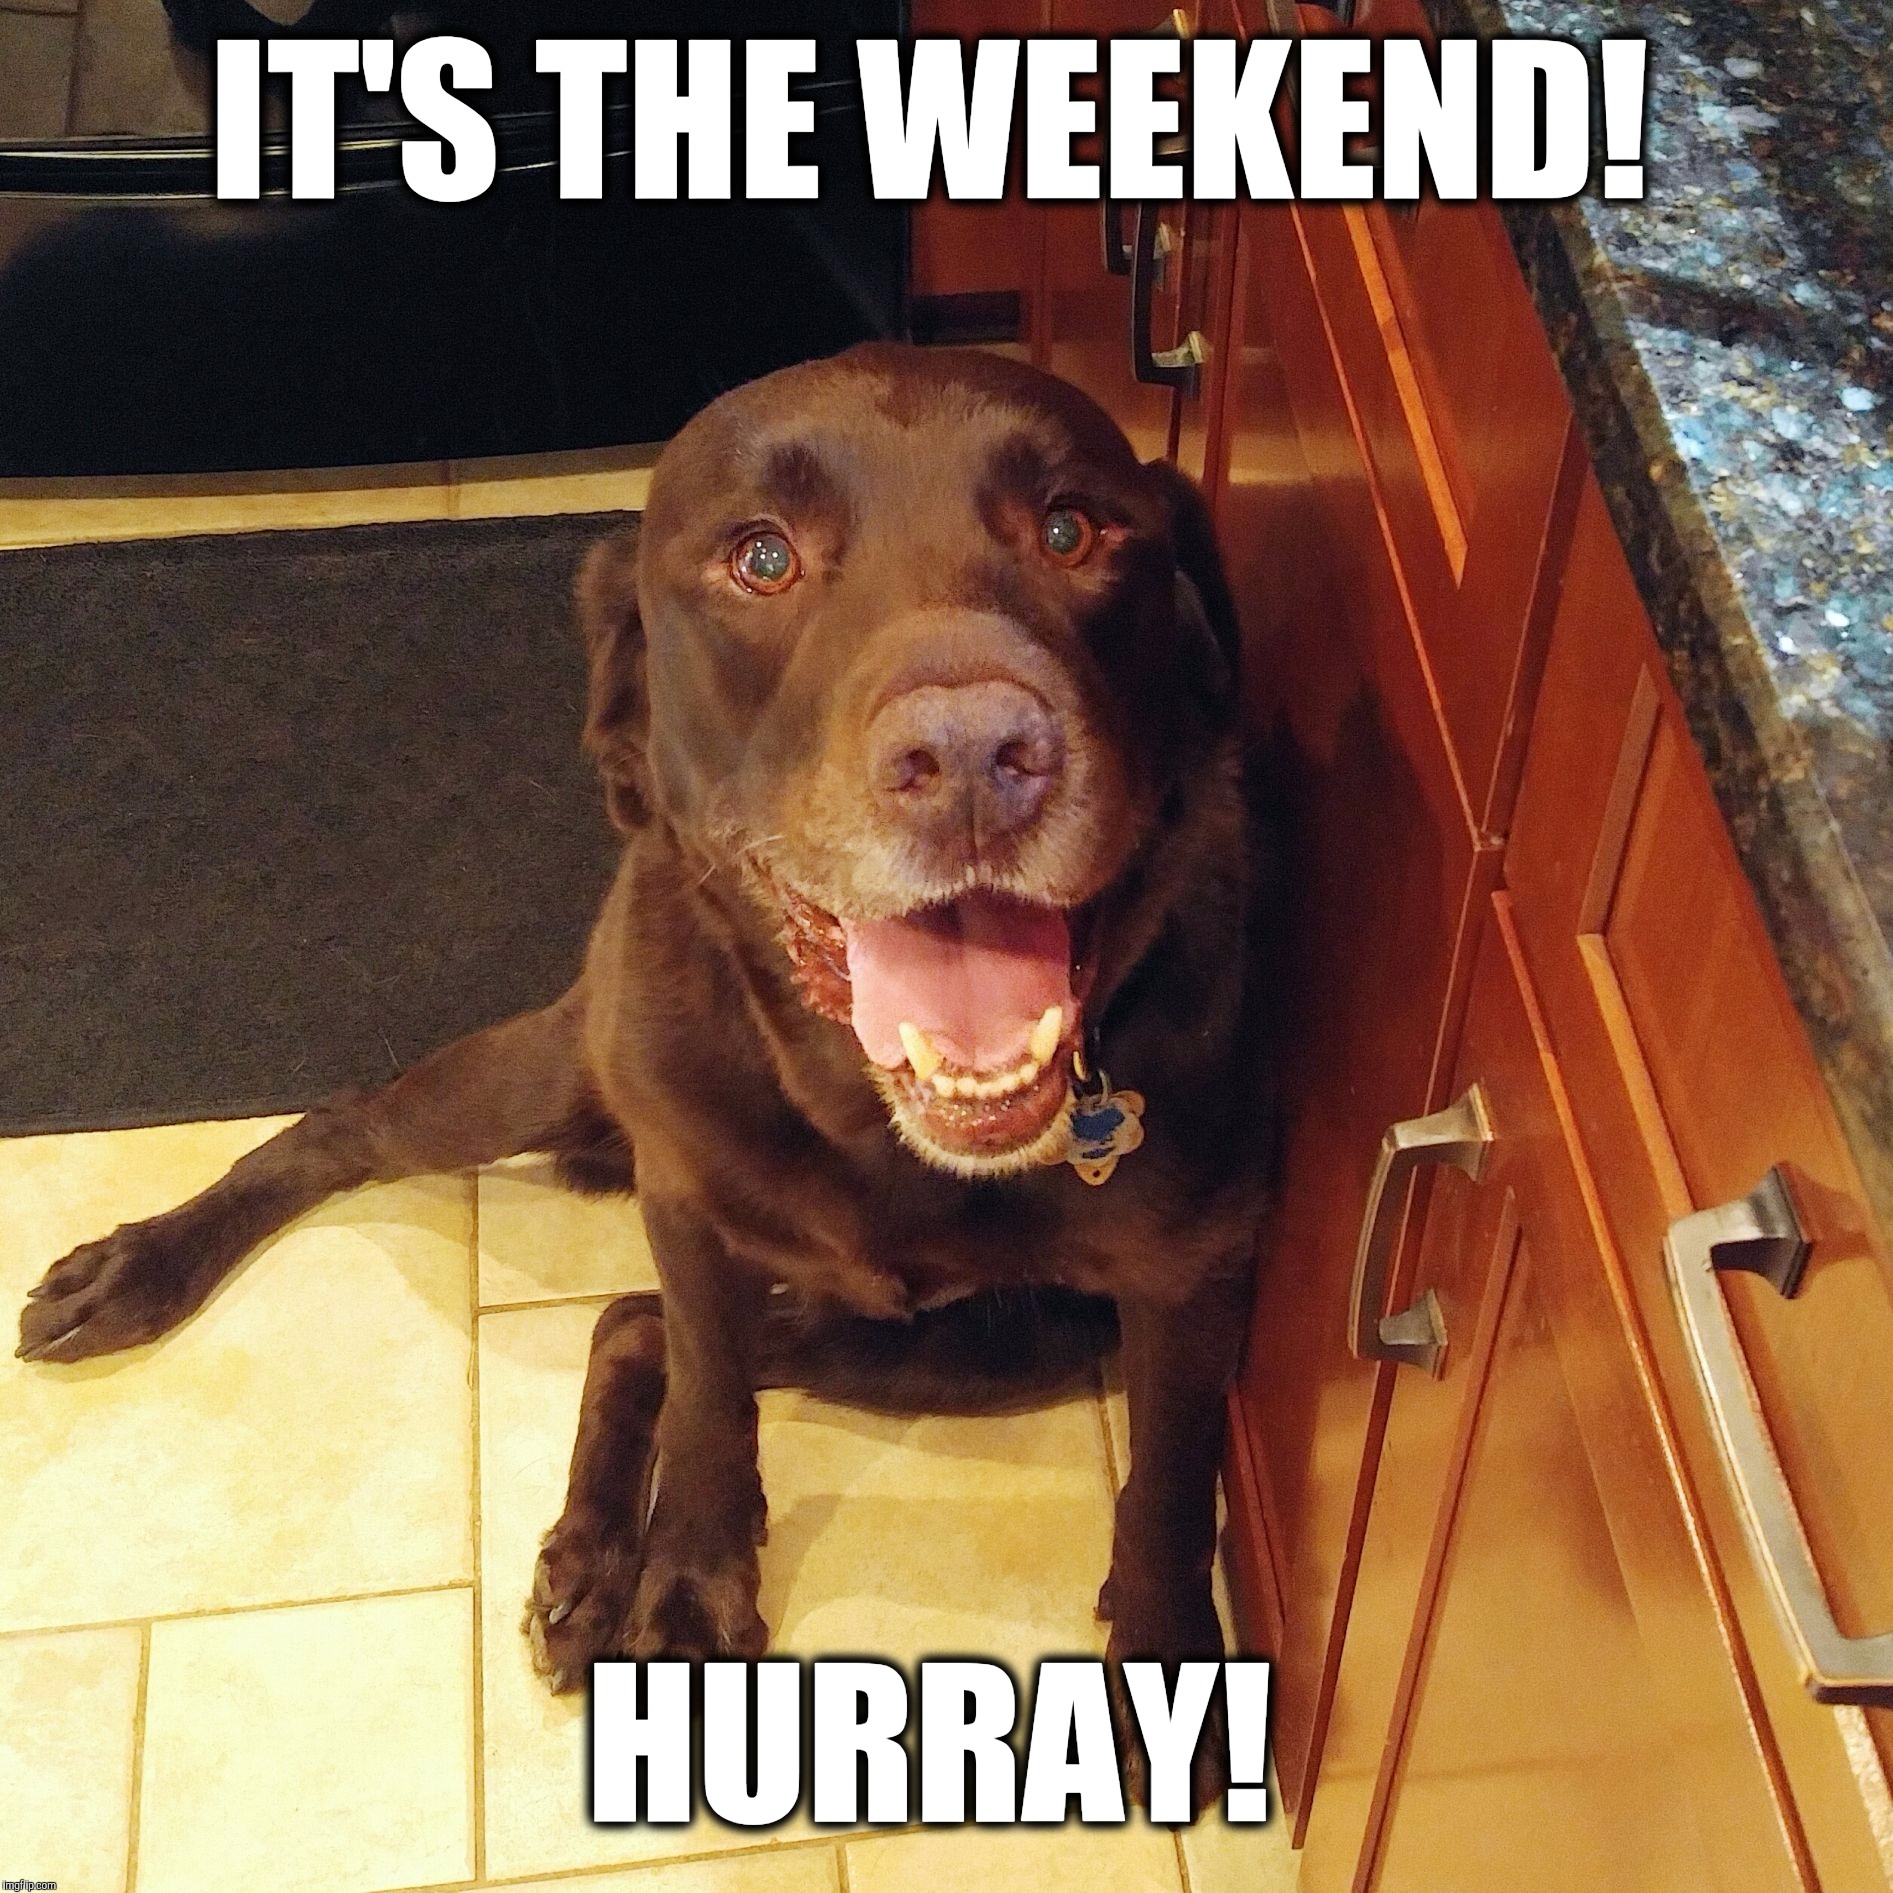 It's the weekend!  | IT'S THE WEEKEND! HURRAY! | image tagged in chuckie the chocolate lab,weekend,hurray,dog memes,cute,tgif | made w/ Imgflip meme maker